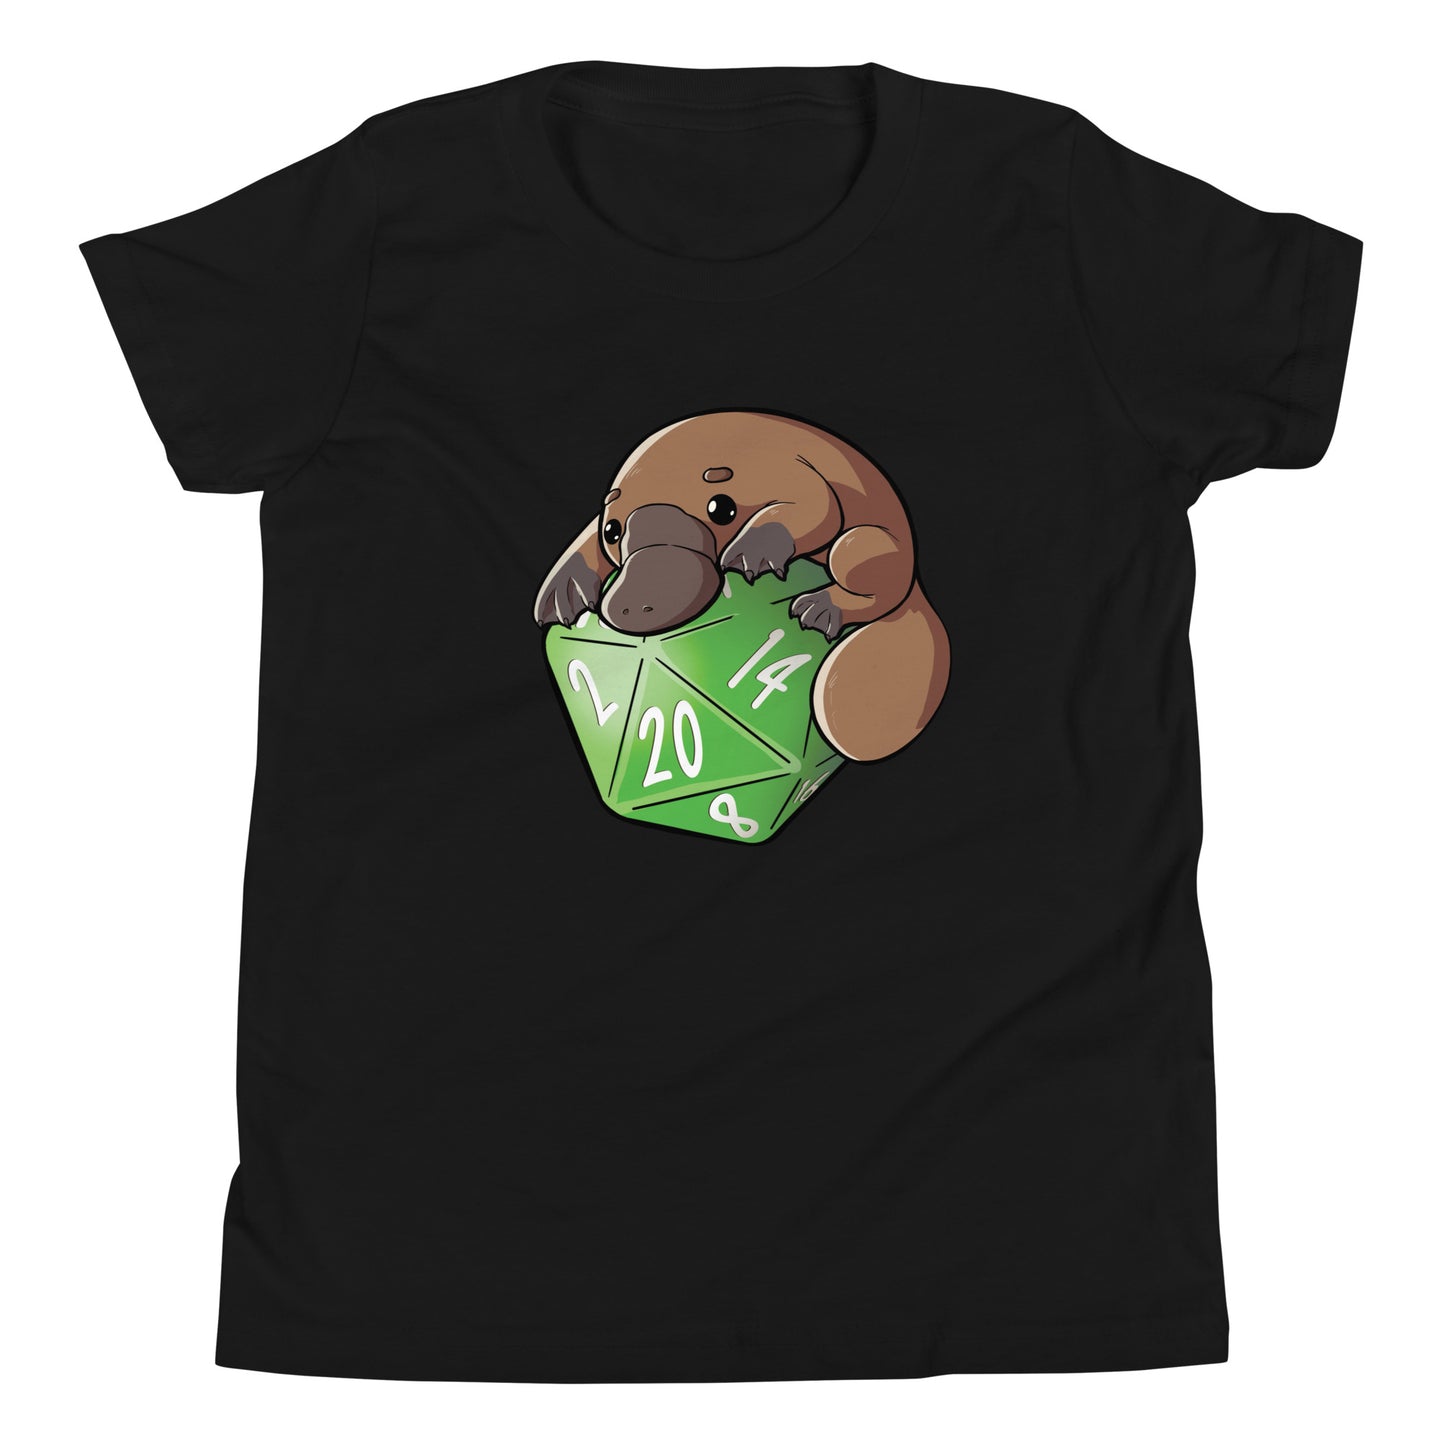 D20 Platypus Youth Short Sleeve T-Shirt  Level 1 Gamers Black S 